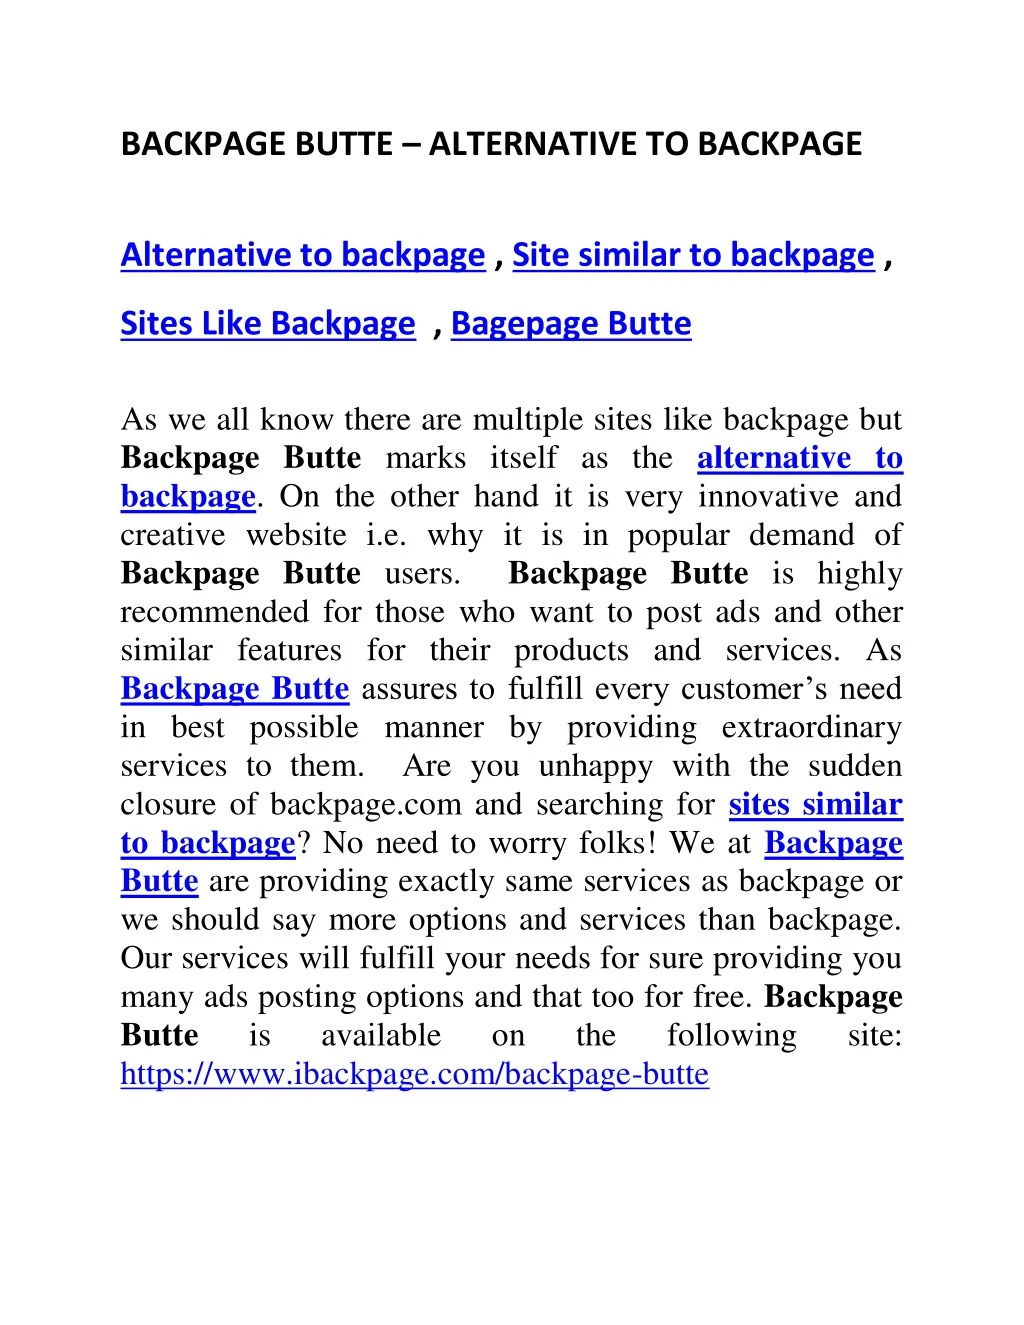 backpage butte alternative to backpage